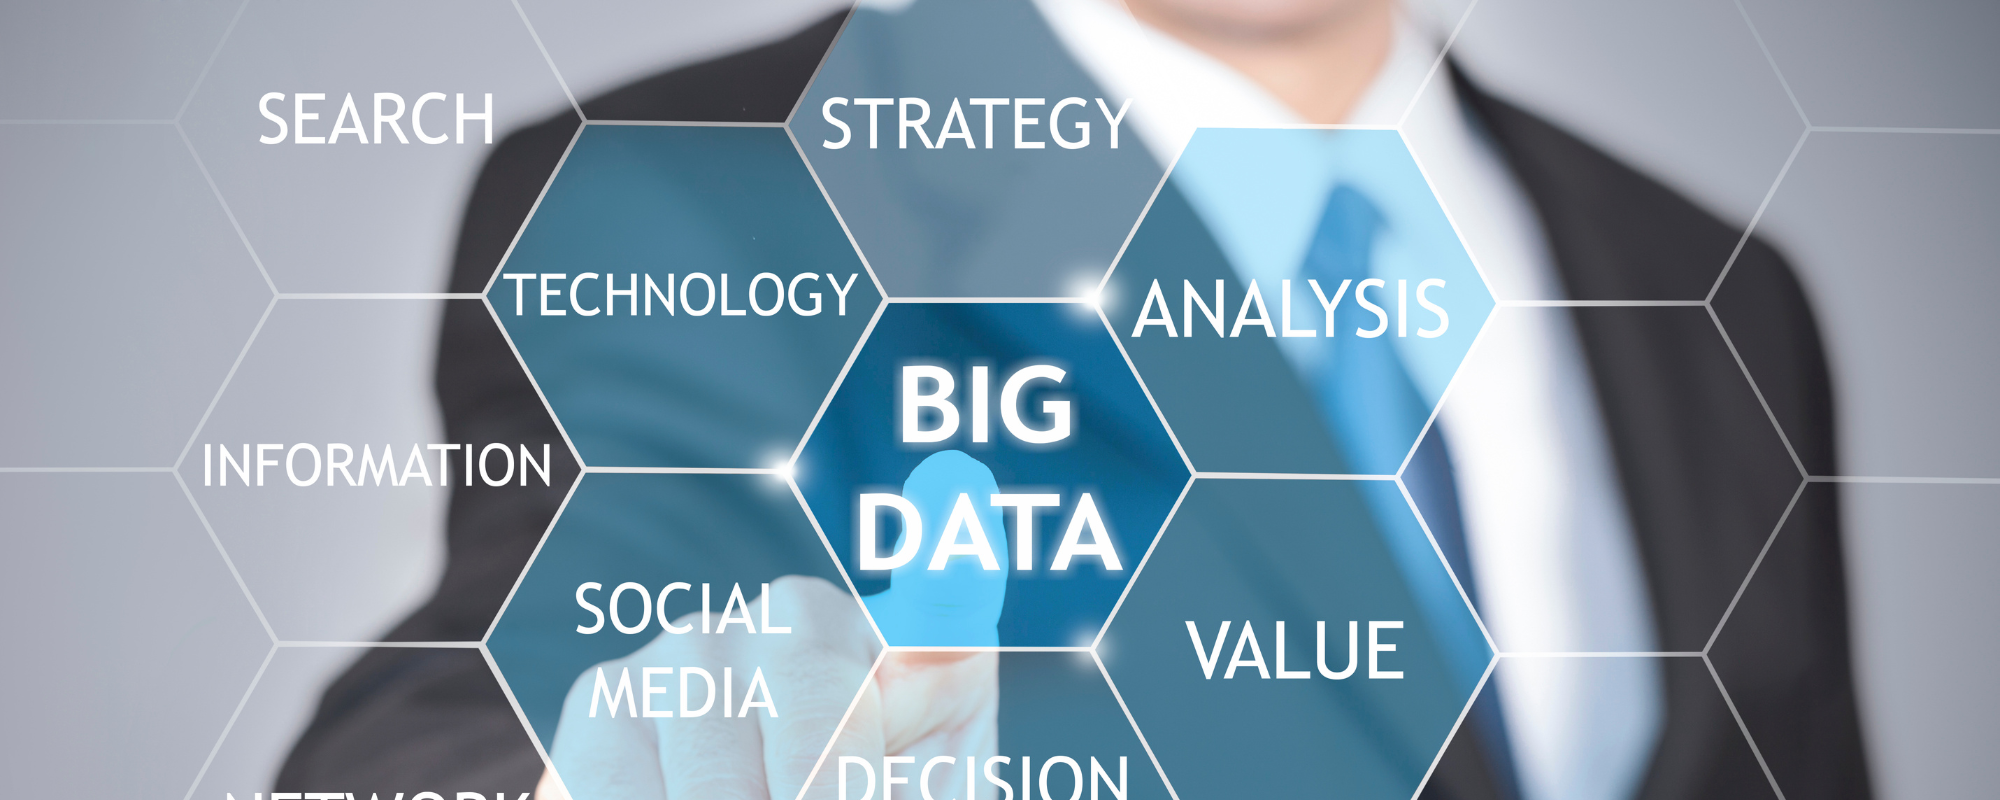 Man in business attire selects Big Data option